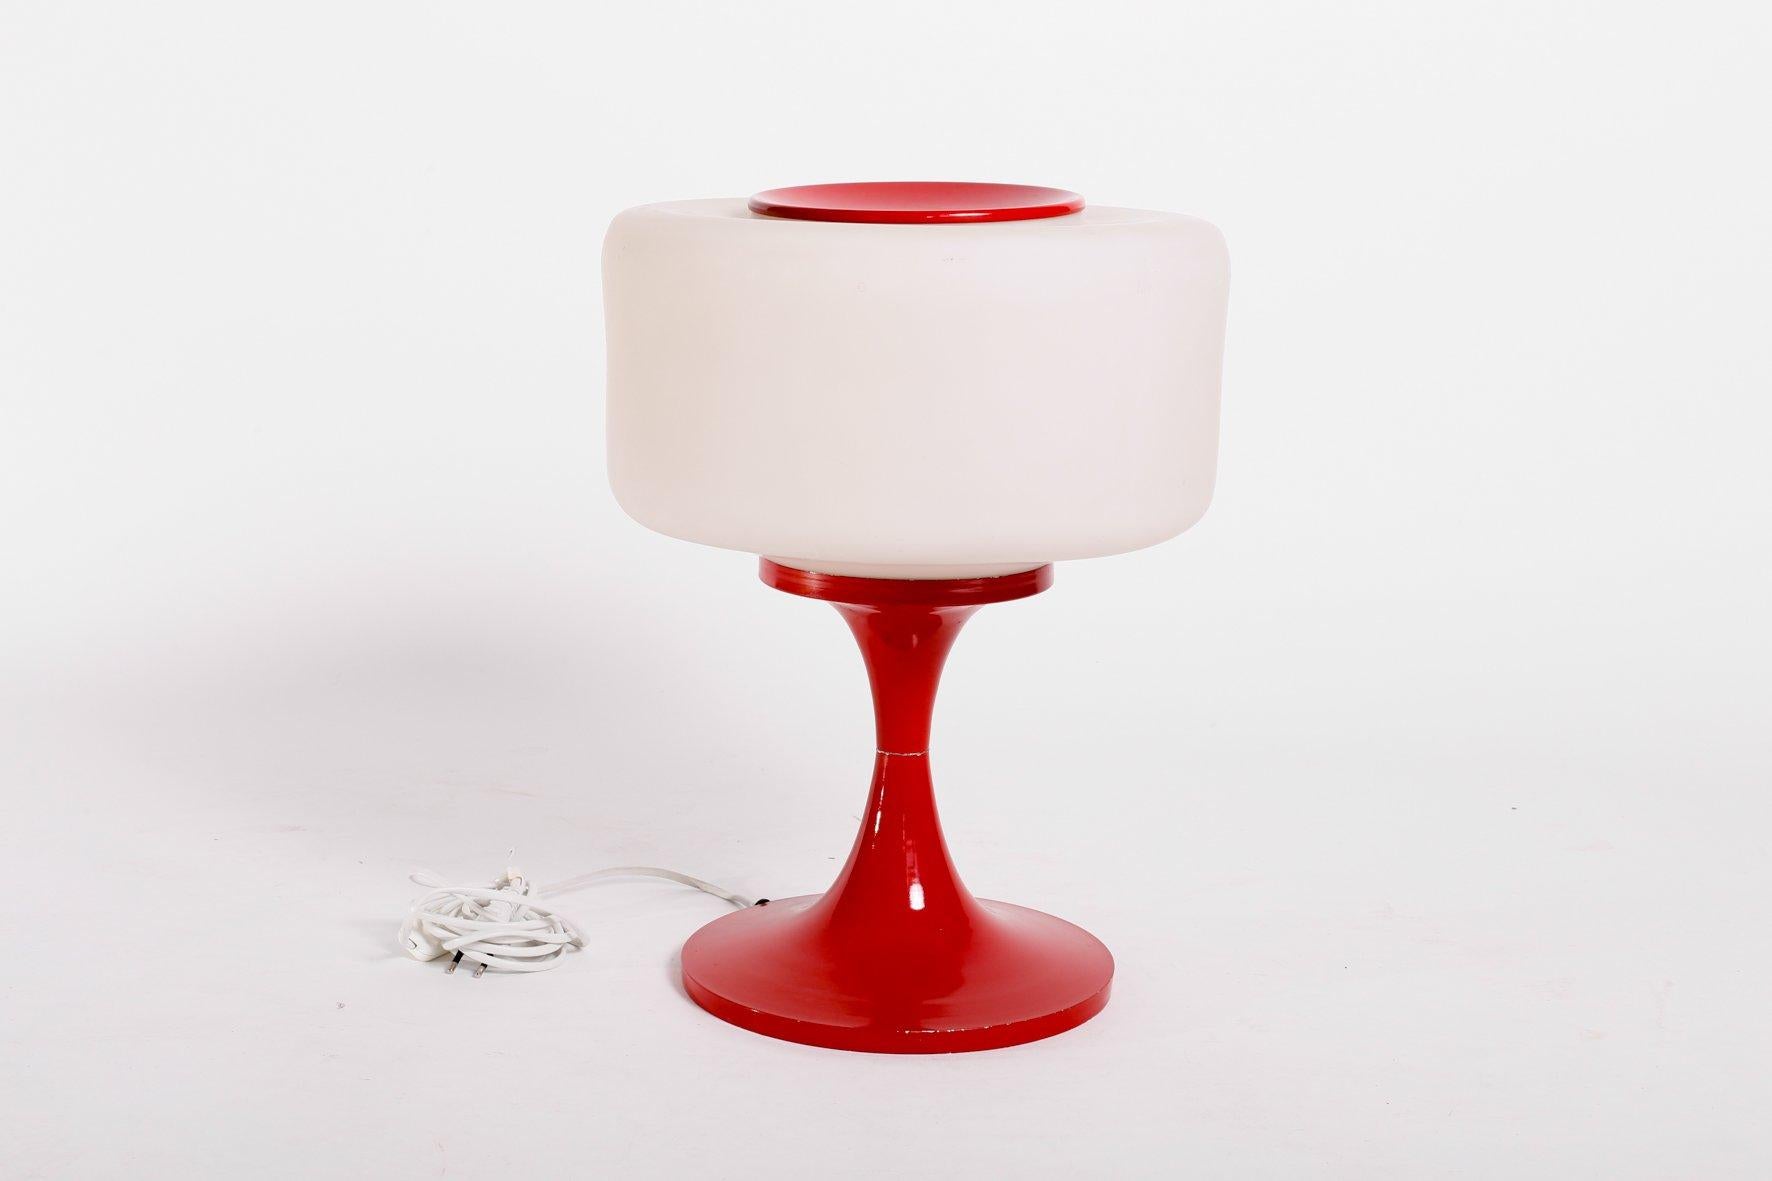 This space age style glass and enameled steel table lamp features an excellent 1960s style design.
It has a large glass shade and a painted enameled steel frame. This vintage item remains fully functional, but it shows sign of age through some